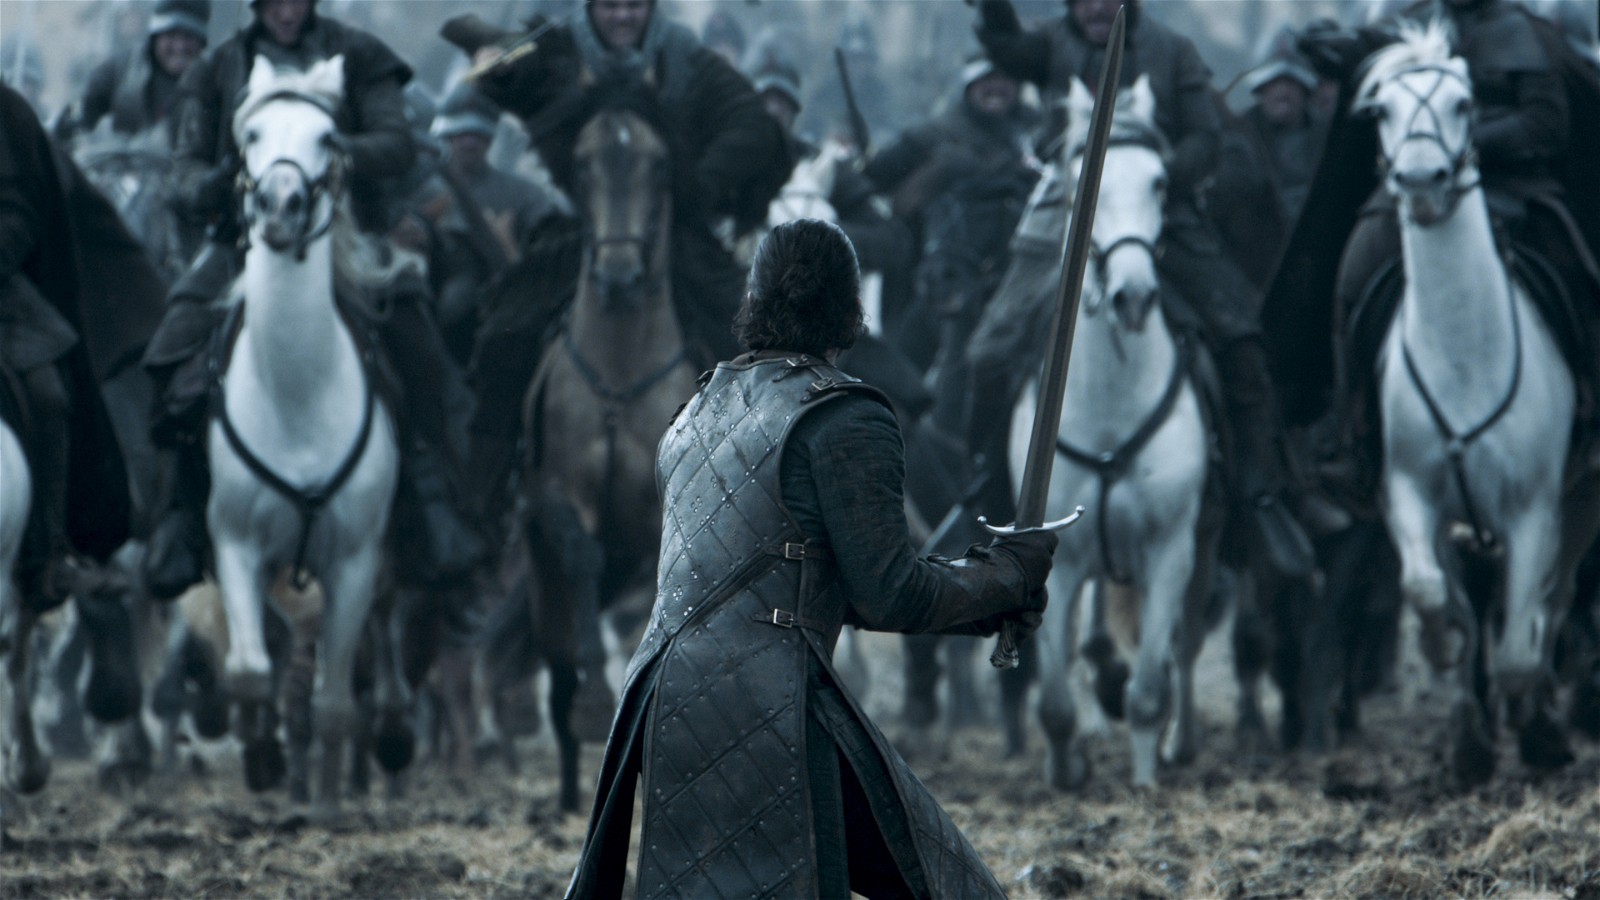 The Battle of the Bastards is considered to be one of the greatest Game of Thrones episodes.